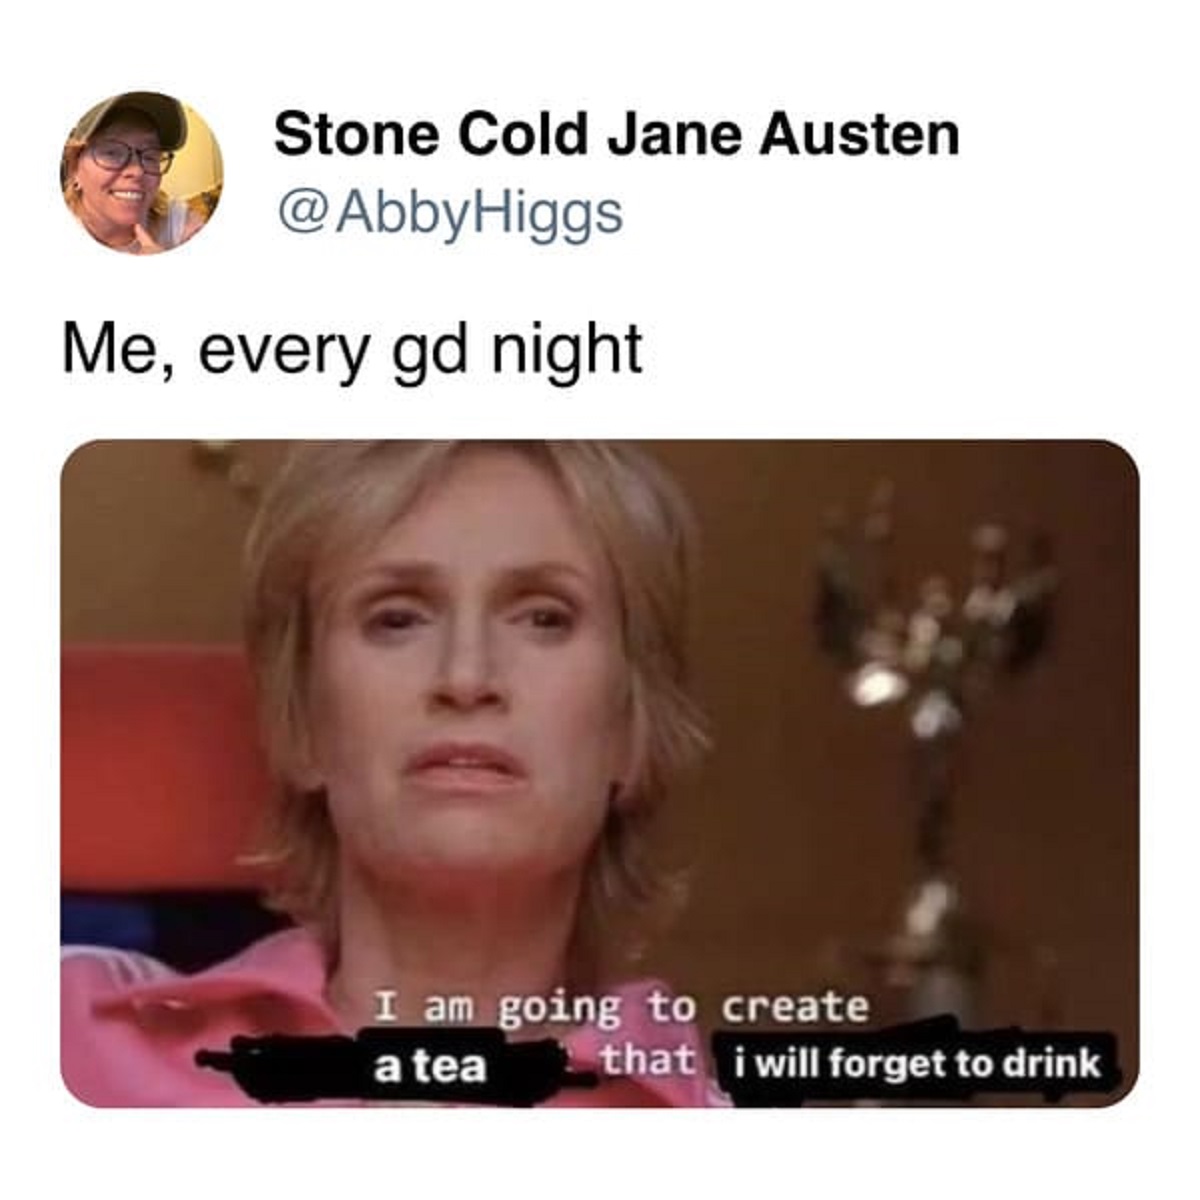 photo caption - Stone Cold Jane Austen Me, every gd night I am going to create a tea that i will forget to drink